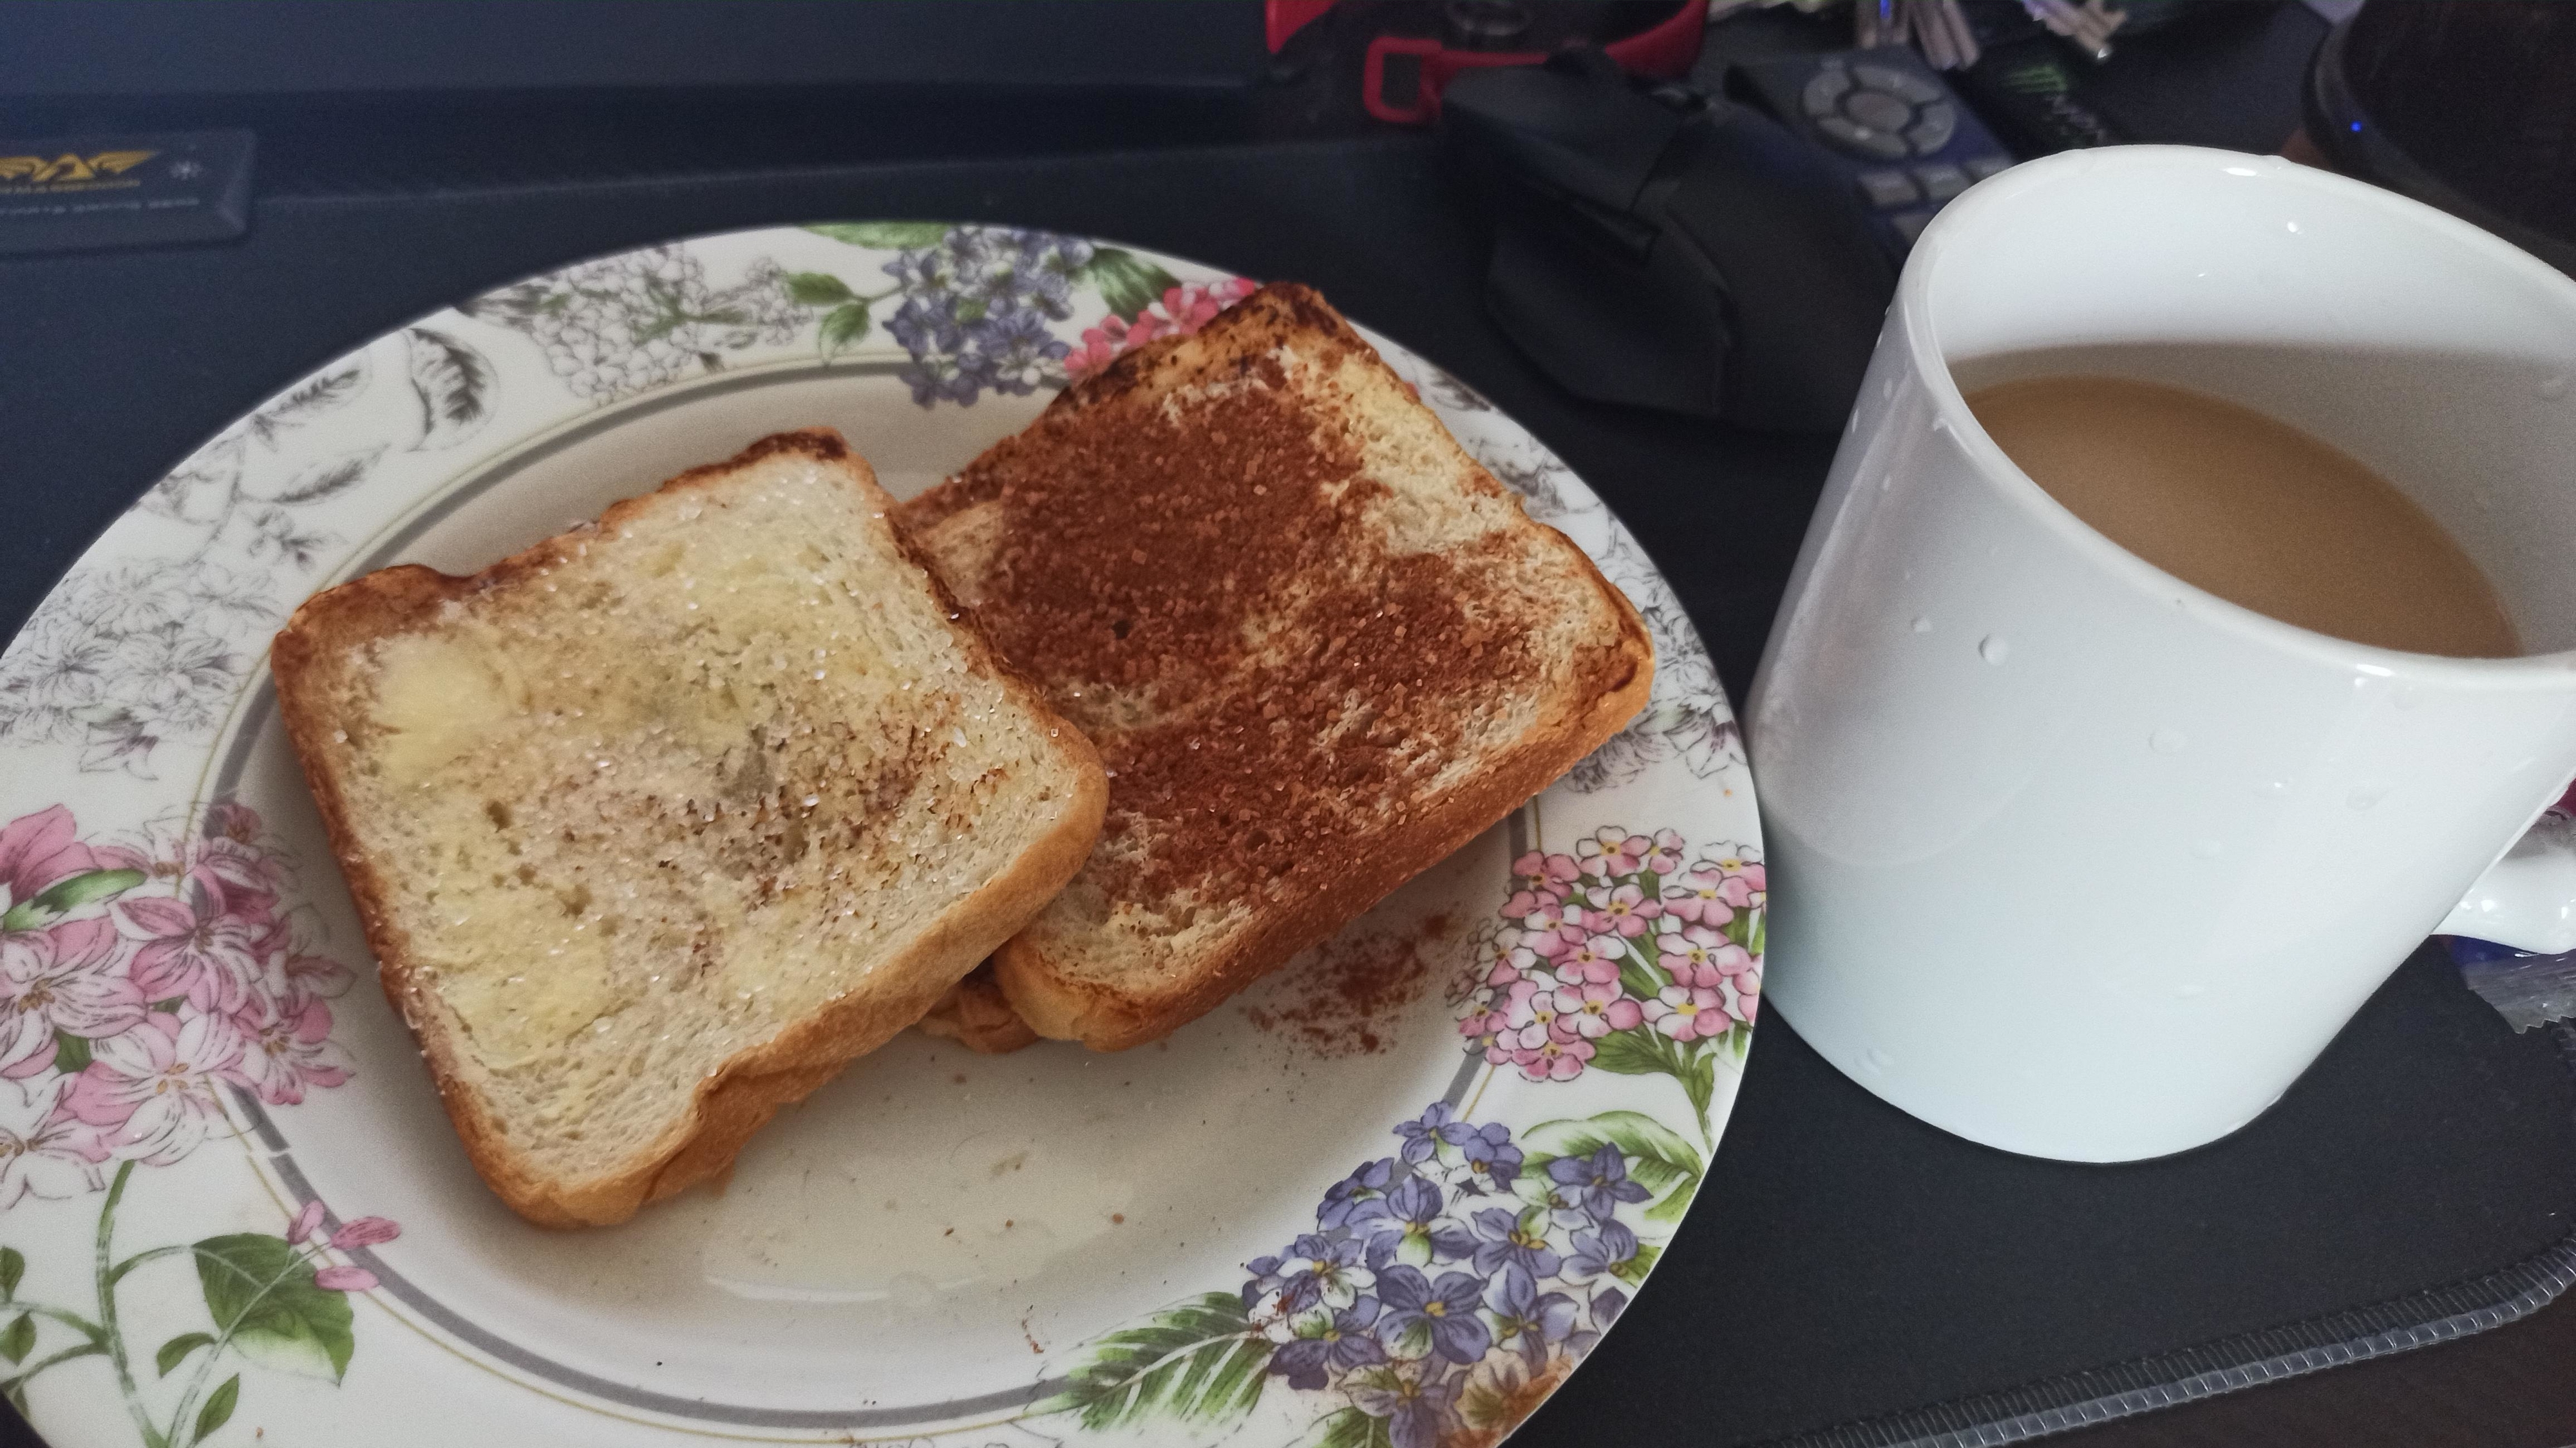 A plate with two slices of buttered toast next to a mug of coffee